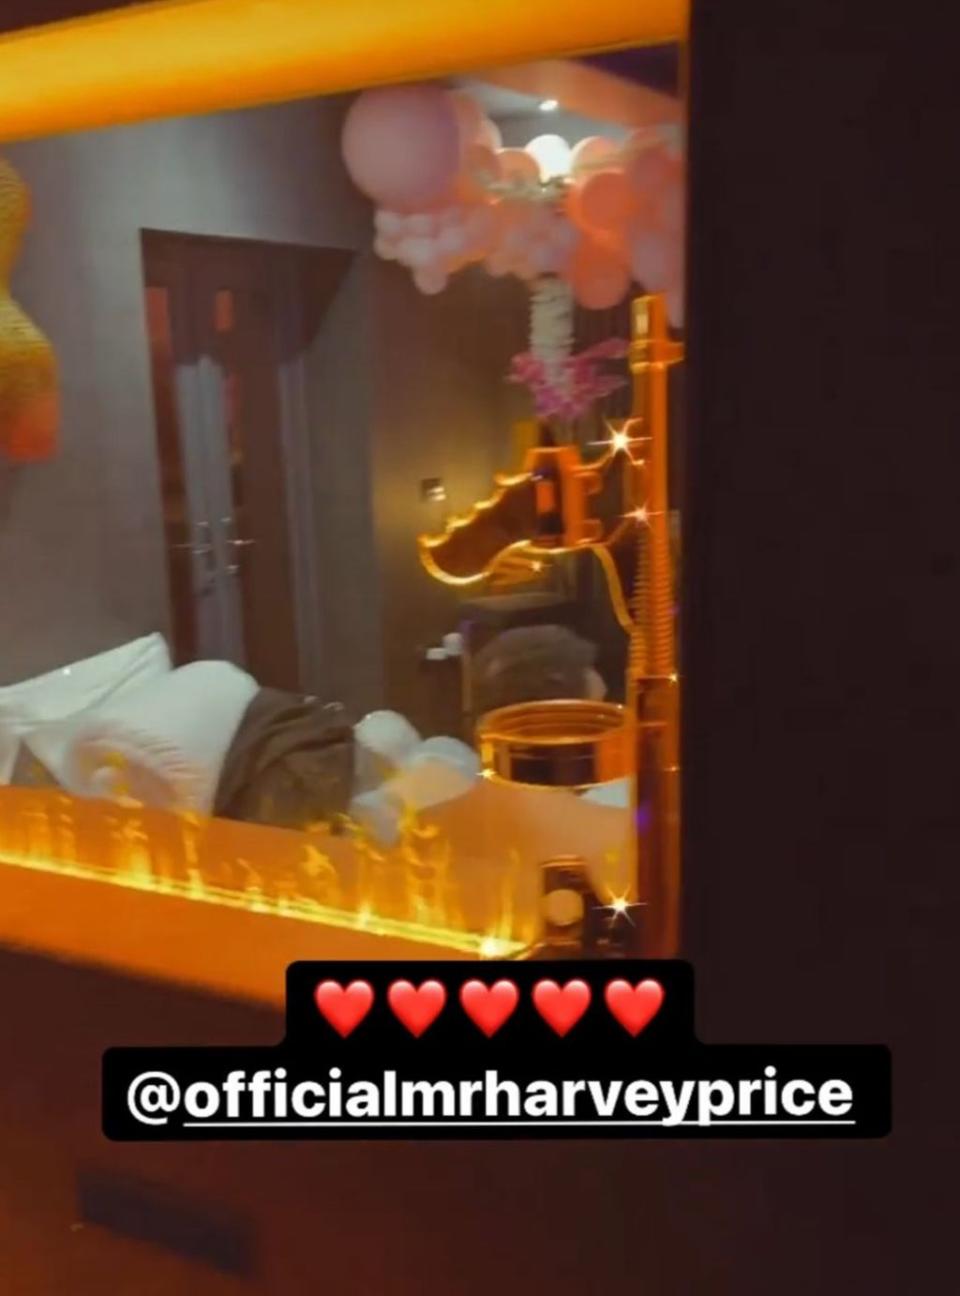 Katie tagged her son Harvey in the posts (Katie Price)